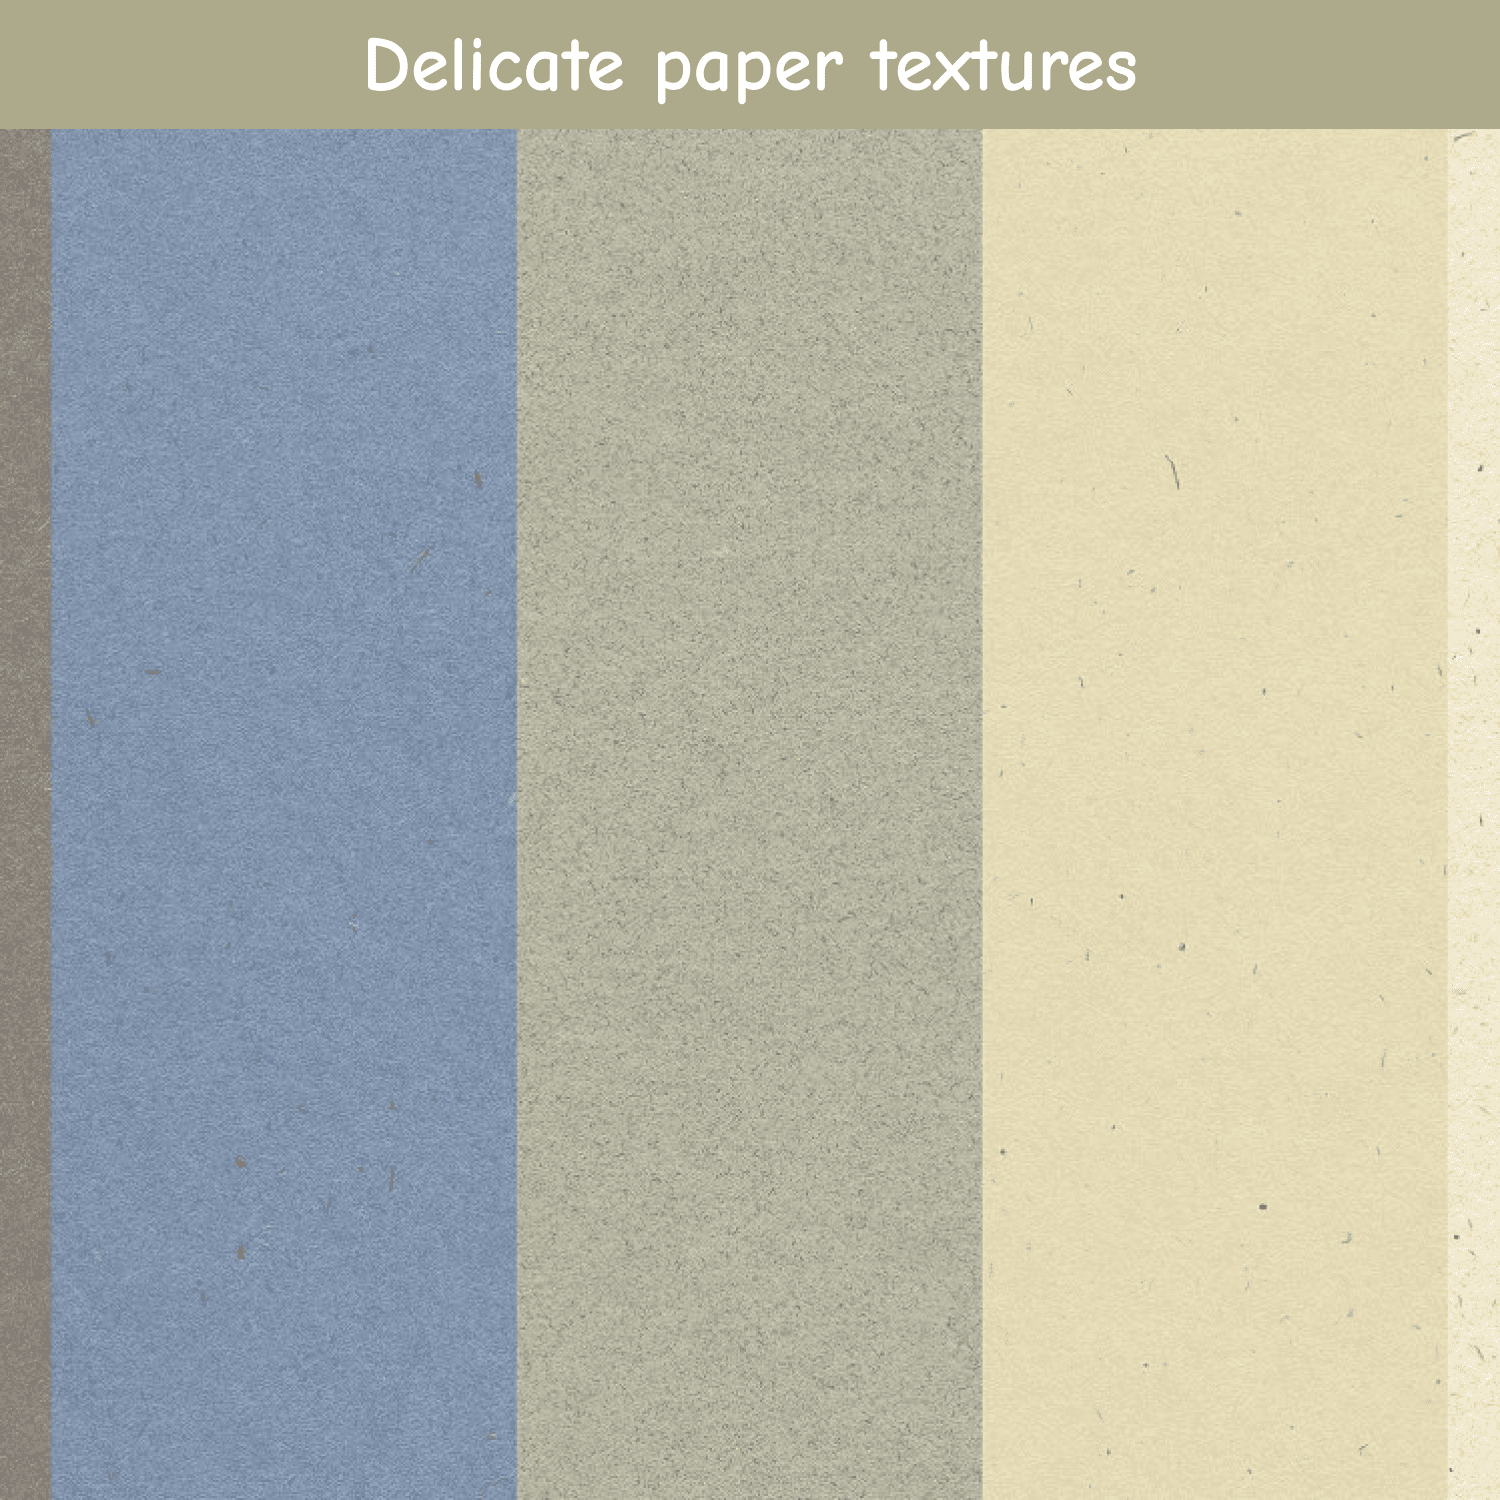 Delicate paper textures cover.